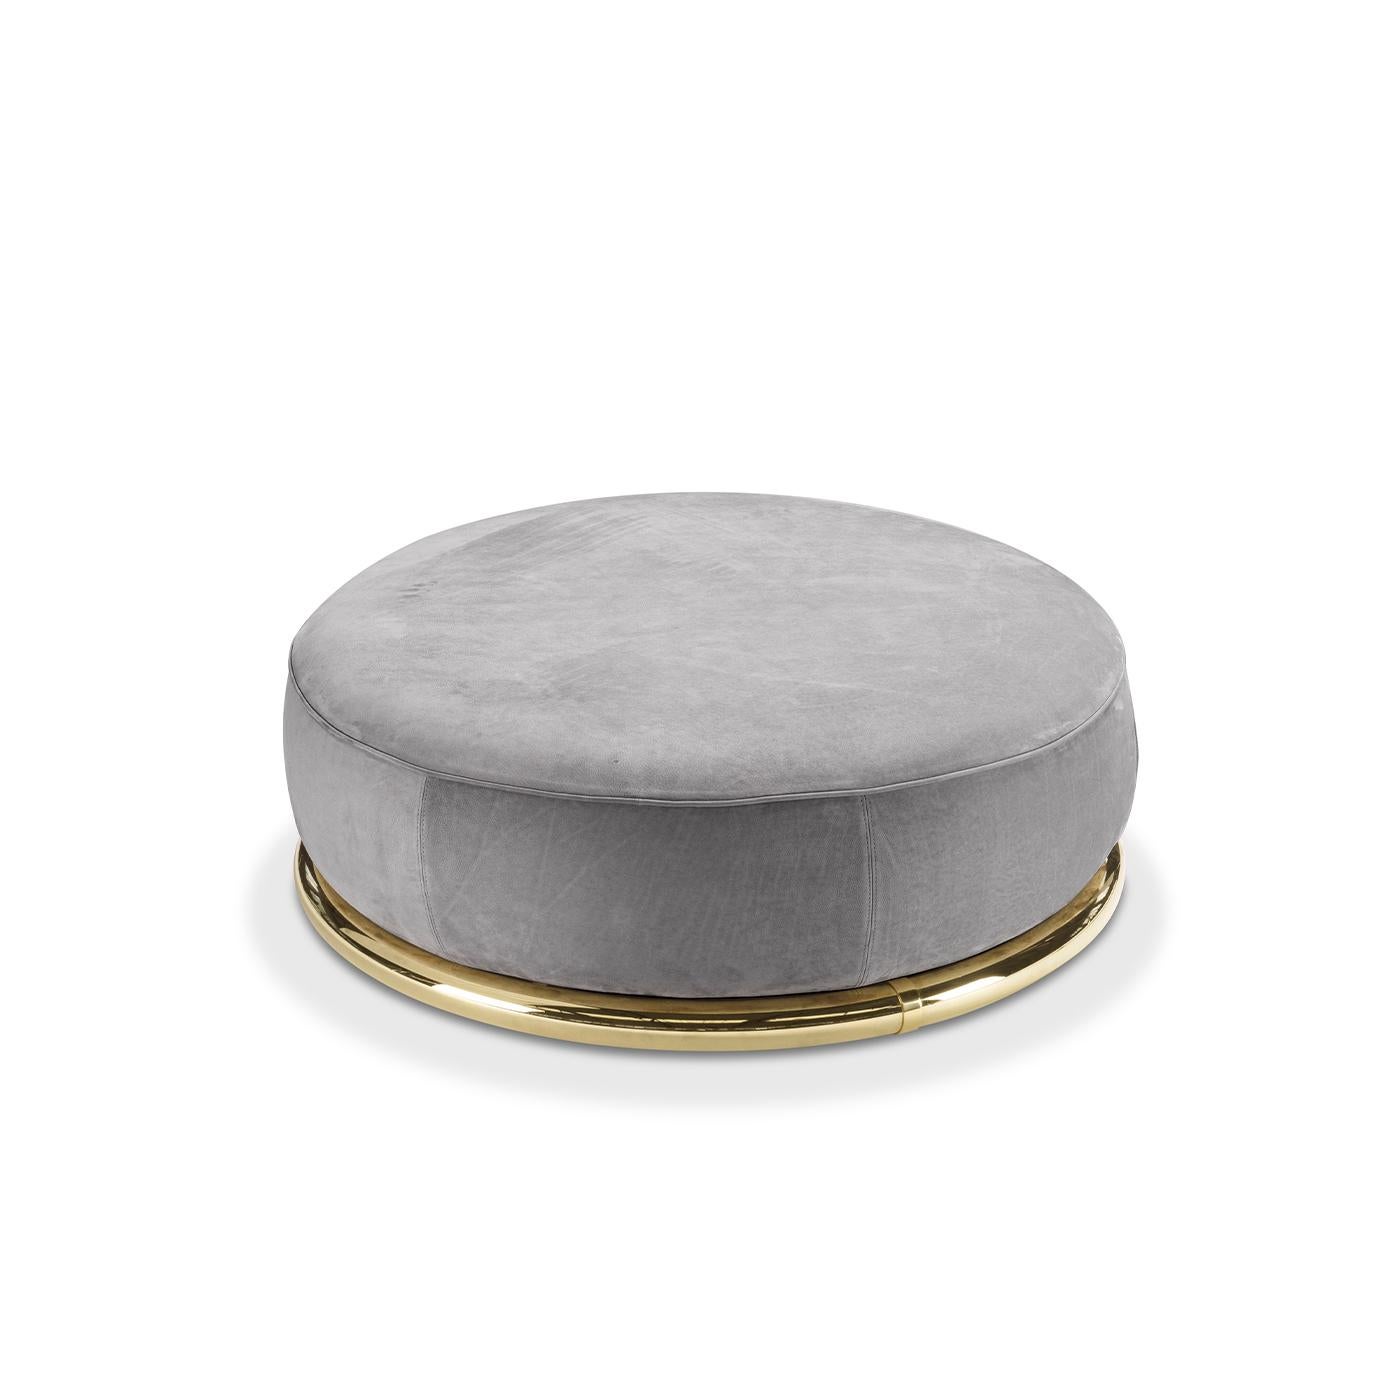 A modern interpretation of the iconic and sleek shapes of a classic ottoman, this magnificent piece flaunts a round silhouette entirely upholstered with fine gray-colored leather. The perfect match to the gray sofa from the Abbracci series, it will